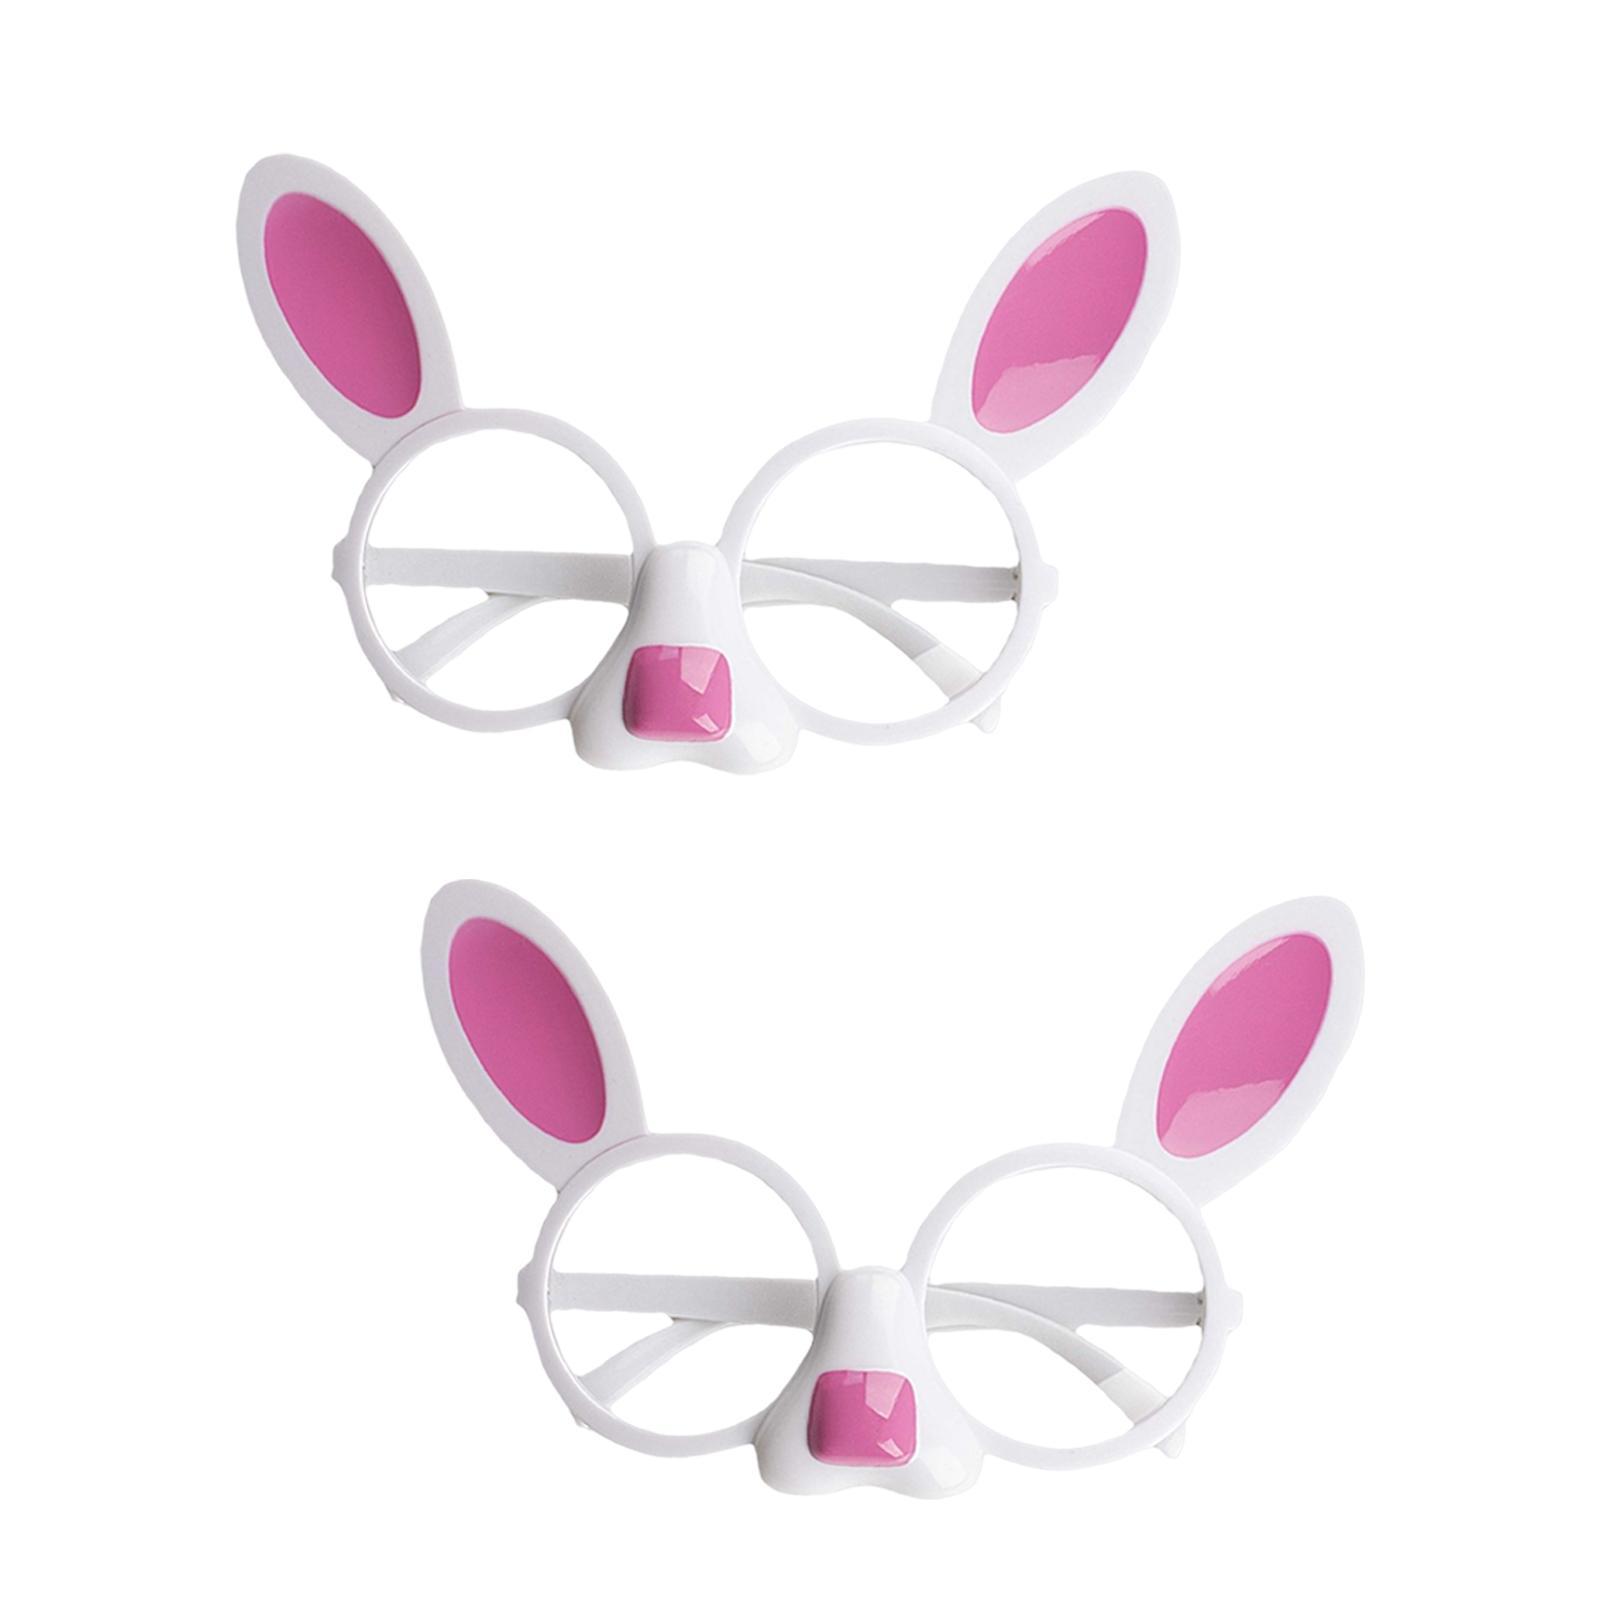 Novelty Party Sunglasses Funny Eye Glasses Costumes Photo Props Square Brim